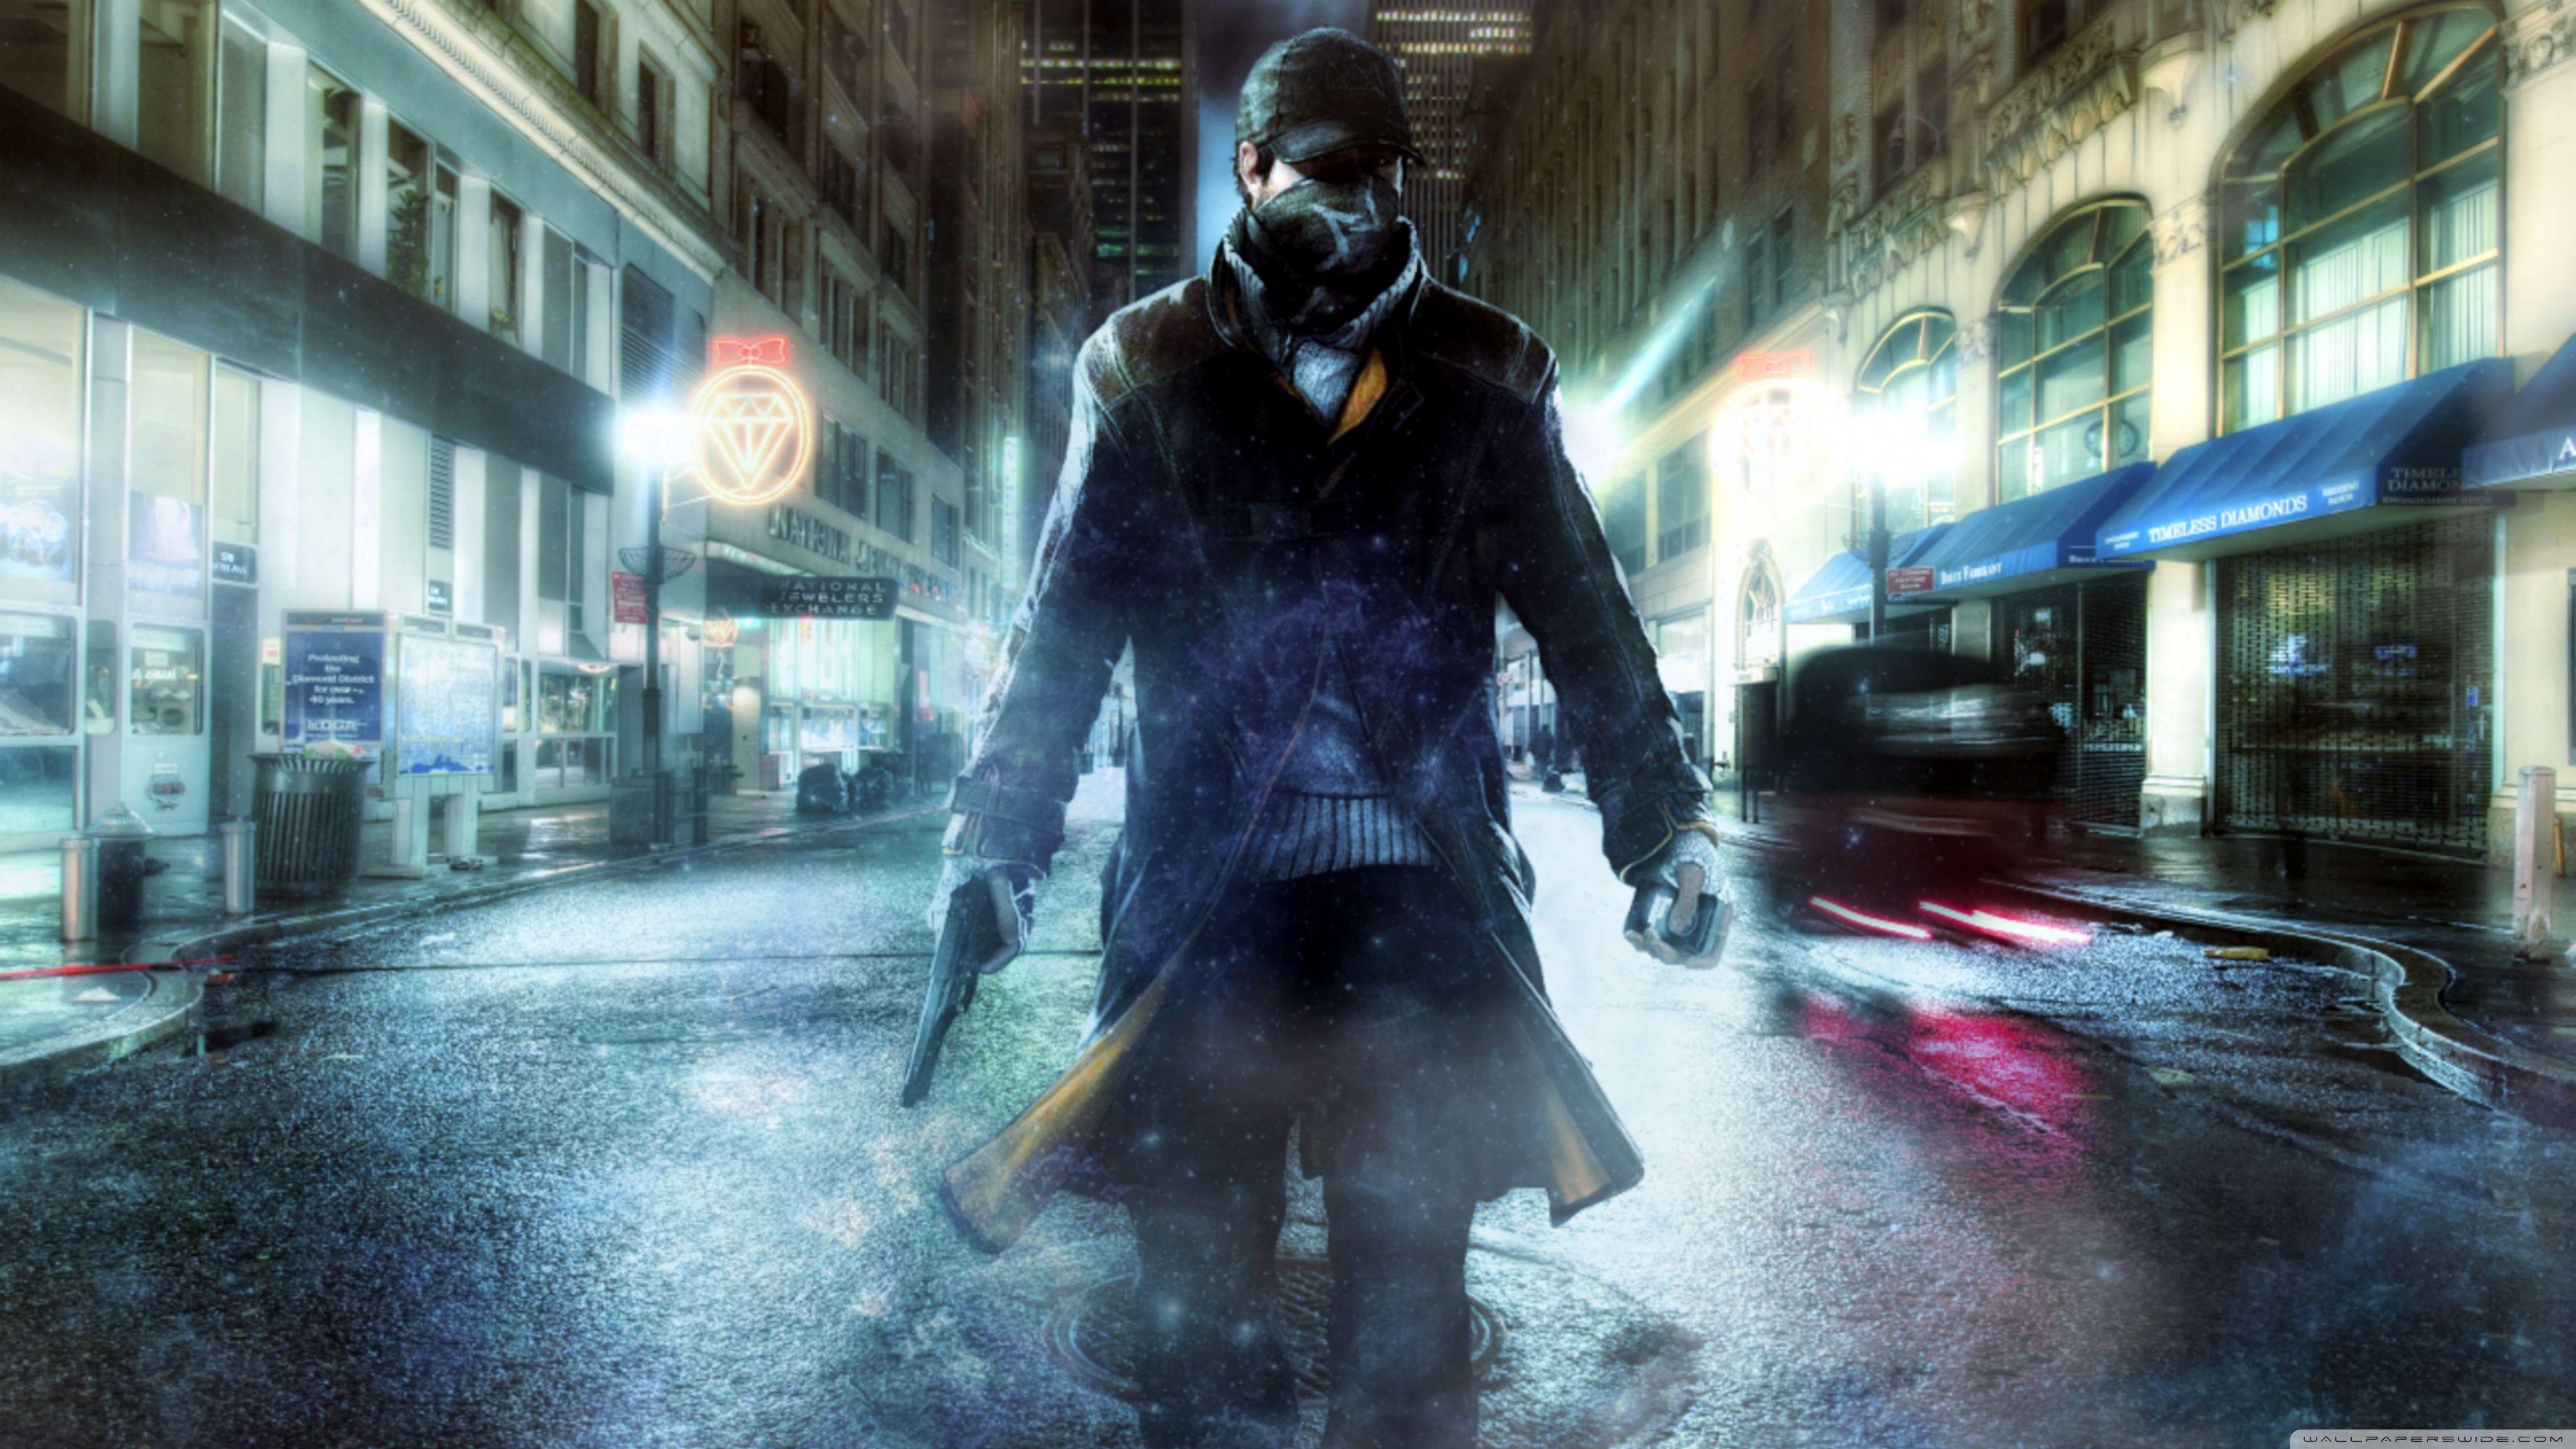 Watch Dogs Tablet Wallpapers Top Free Watch Dogs Tablet Backgrounds Wallpaperaccess